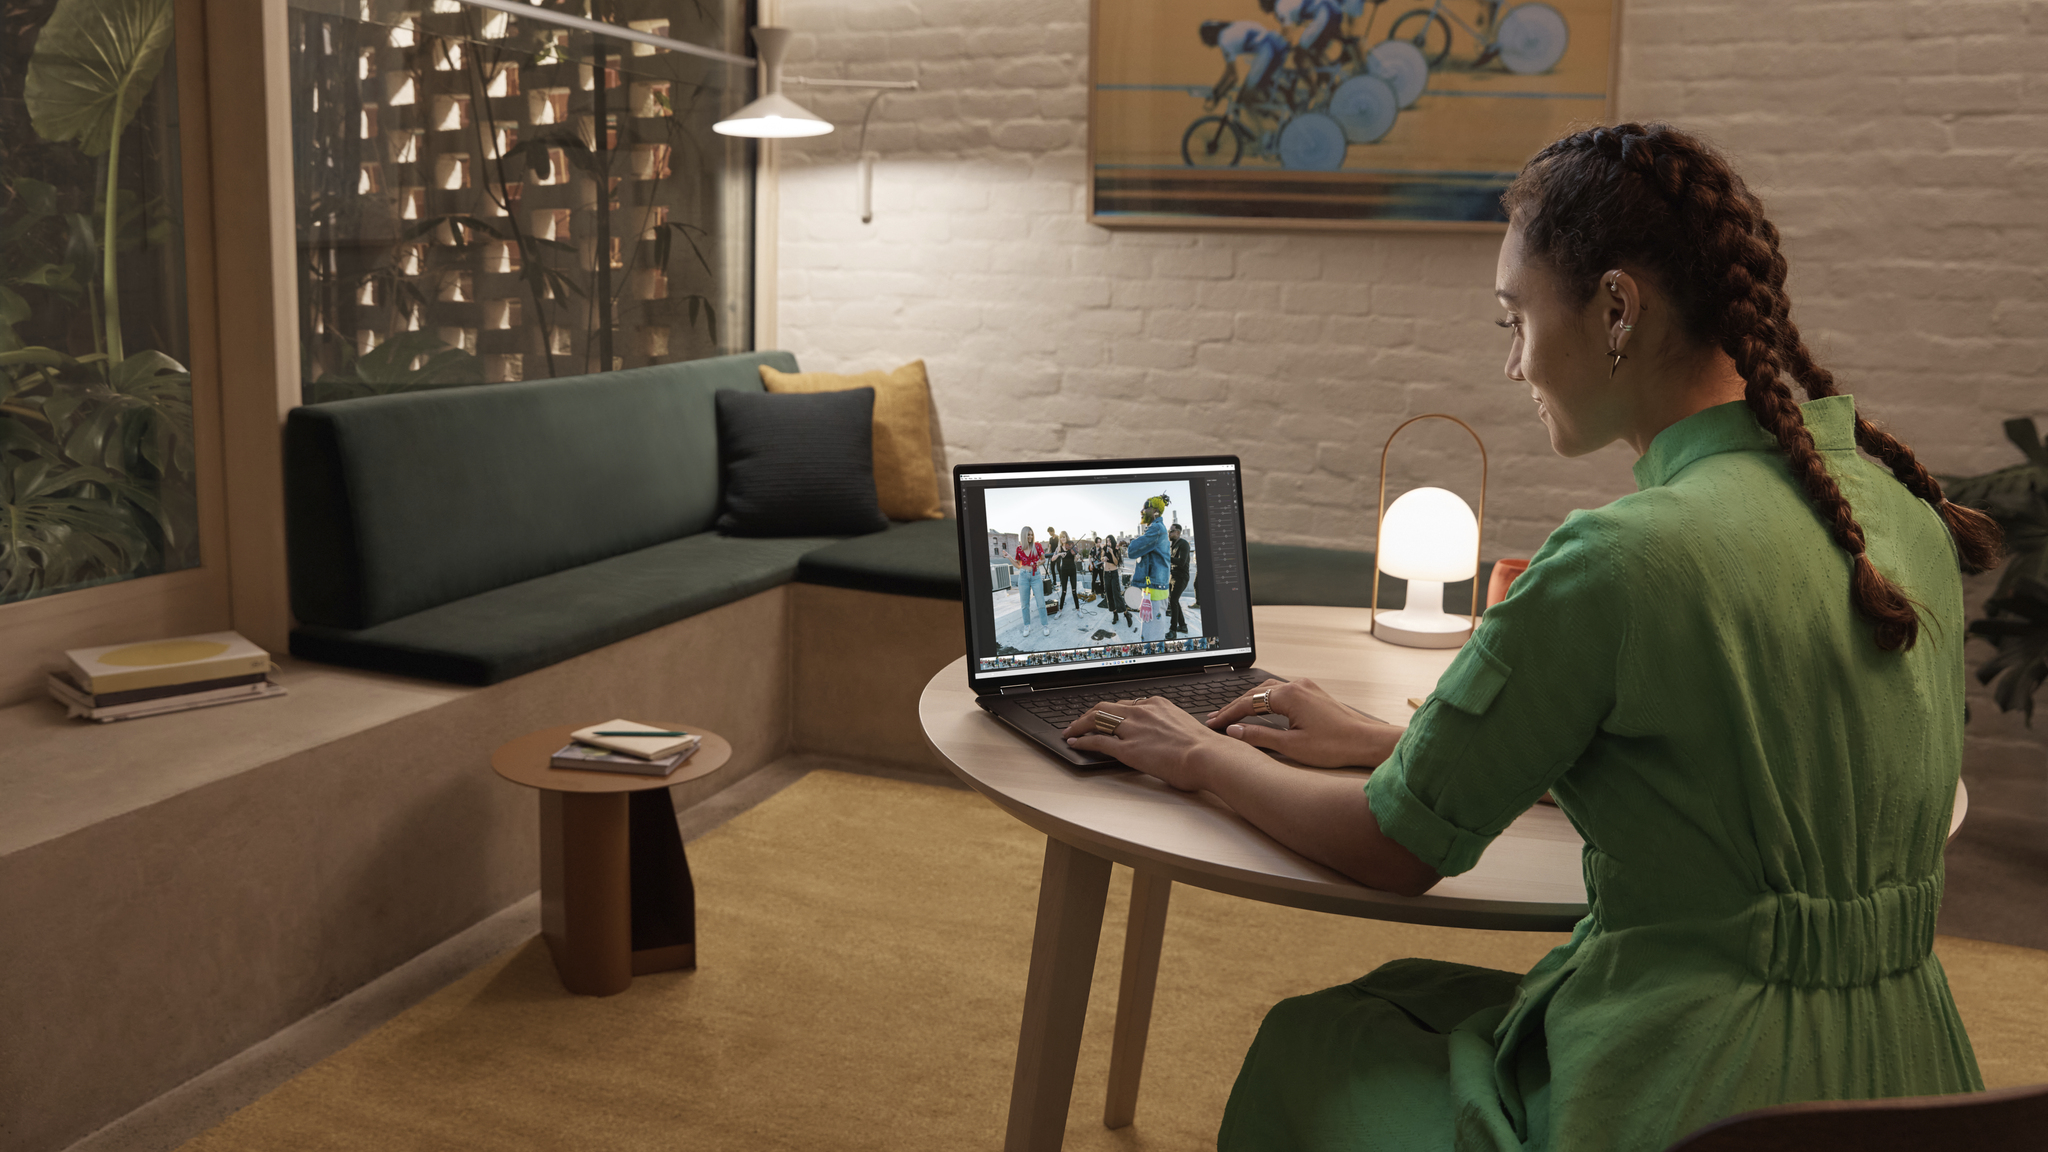 A user in a red dress types on the HP Spectre x360 16 in an evening room at a small wooden table. The screen displays a photo of a group of urban dancers in an outdoor scene in an editing program. To its left is a small lit lamp.